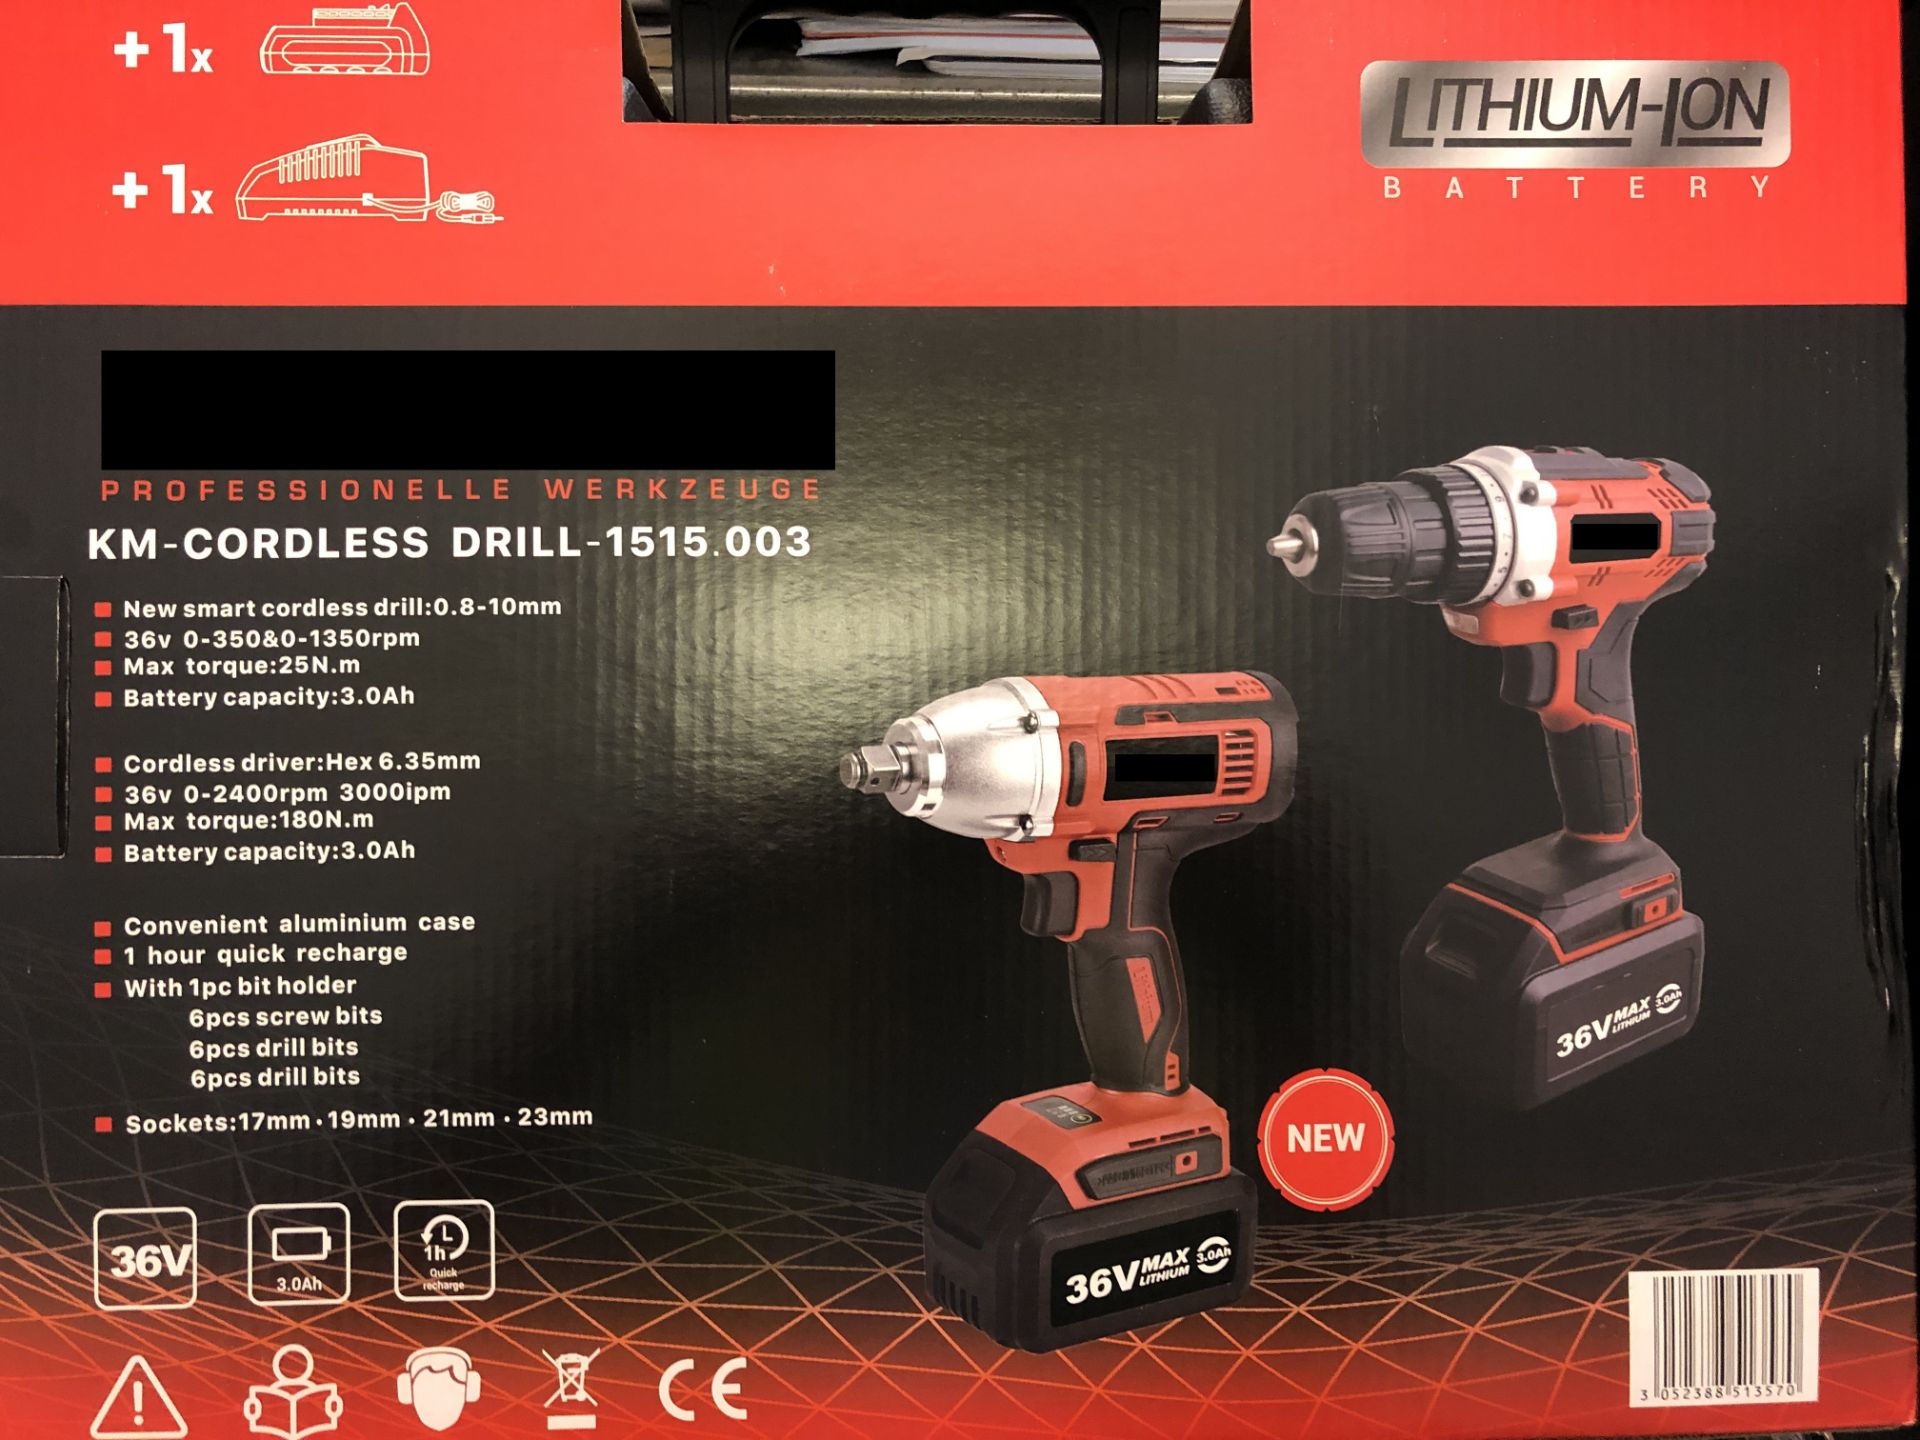 V Brand New 36V Twin Pack Cordless Drill/Driver And Cordless Impact Driver - 1 Hour Charge - 3.0Ah